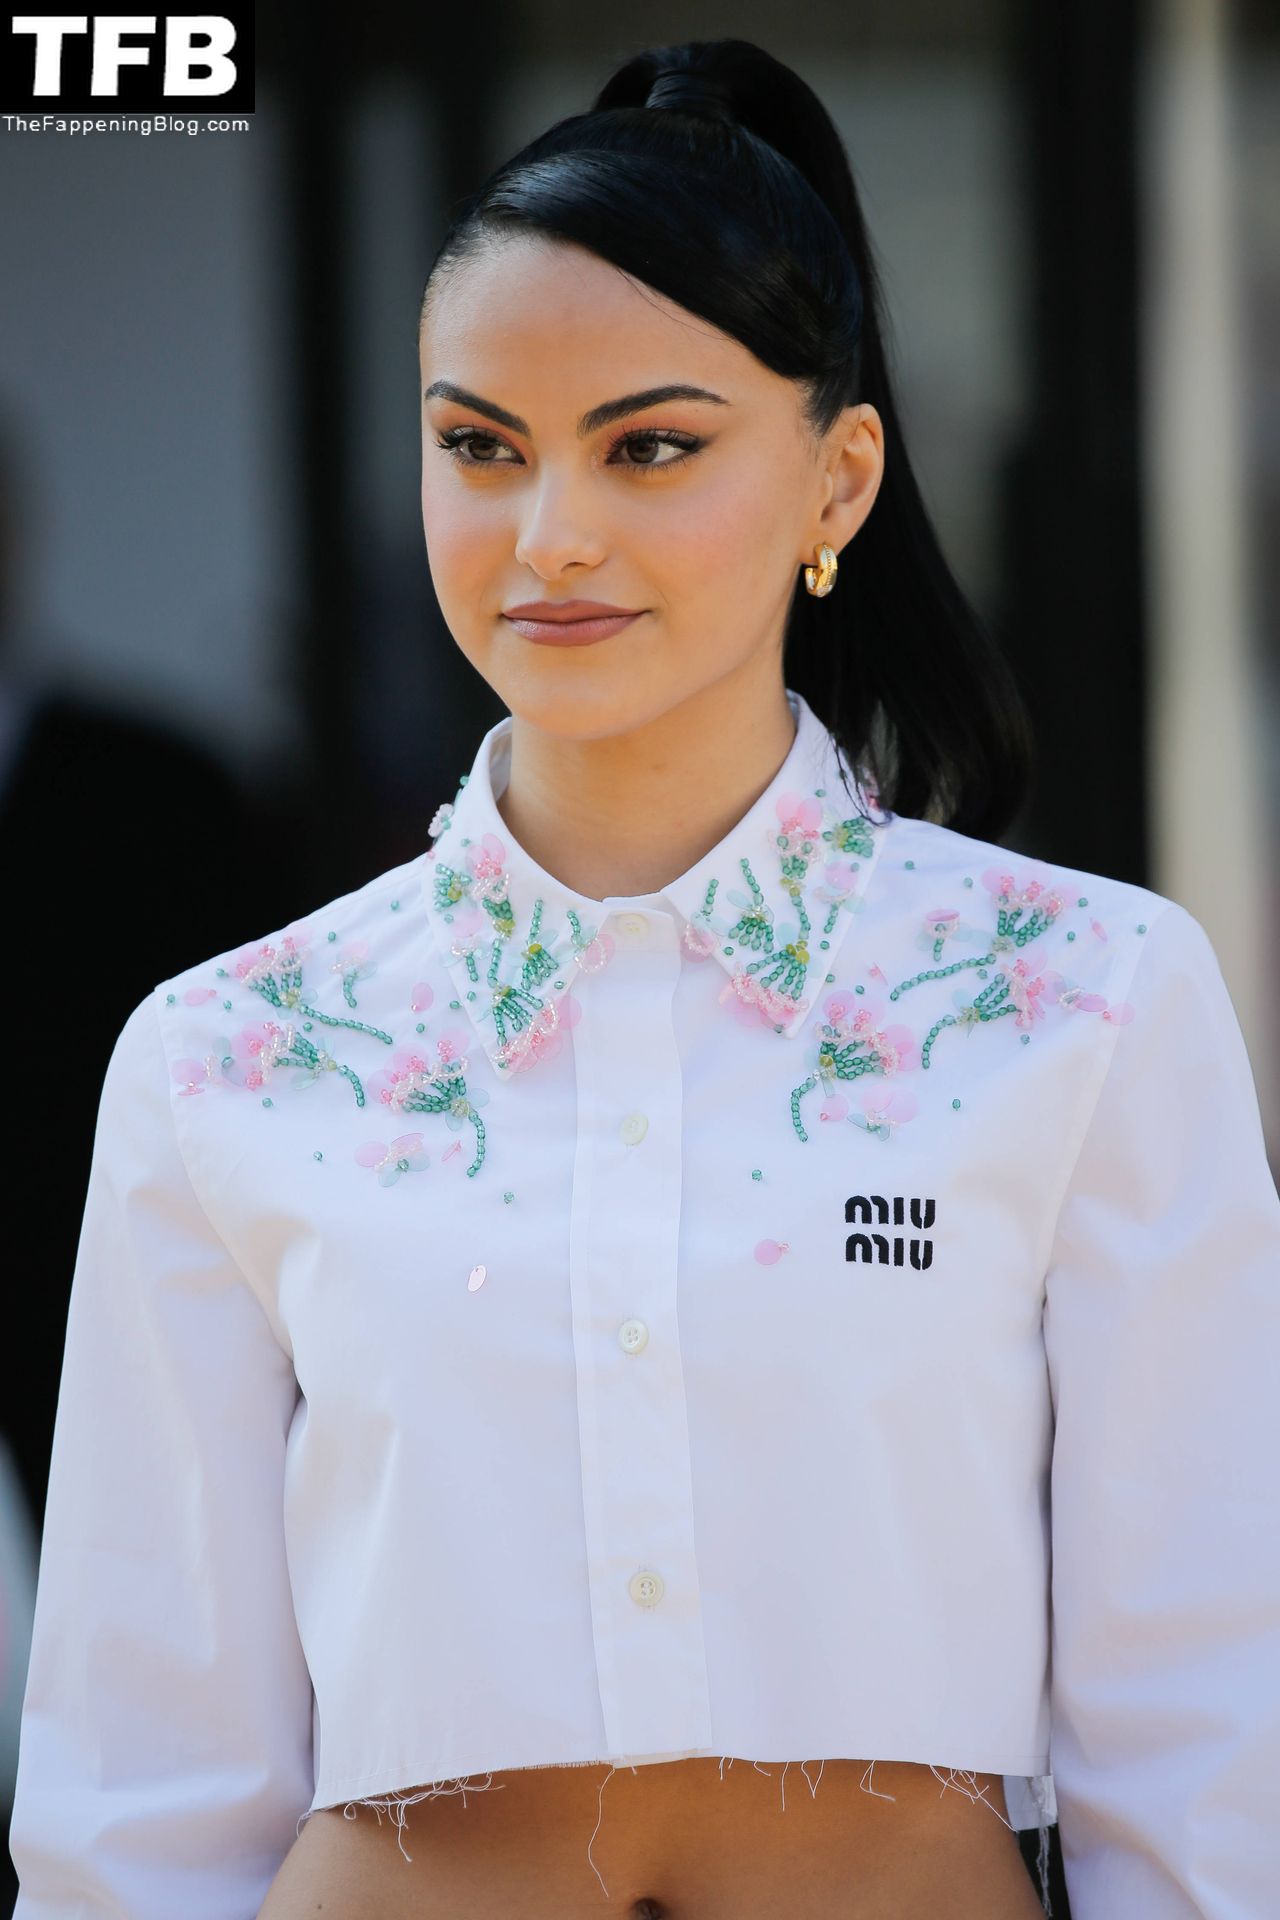 Camila-Mendes-Sexy-The-Fappening-Blog-9.jpg